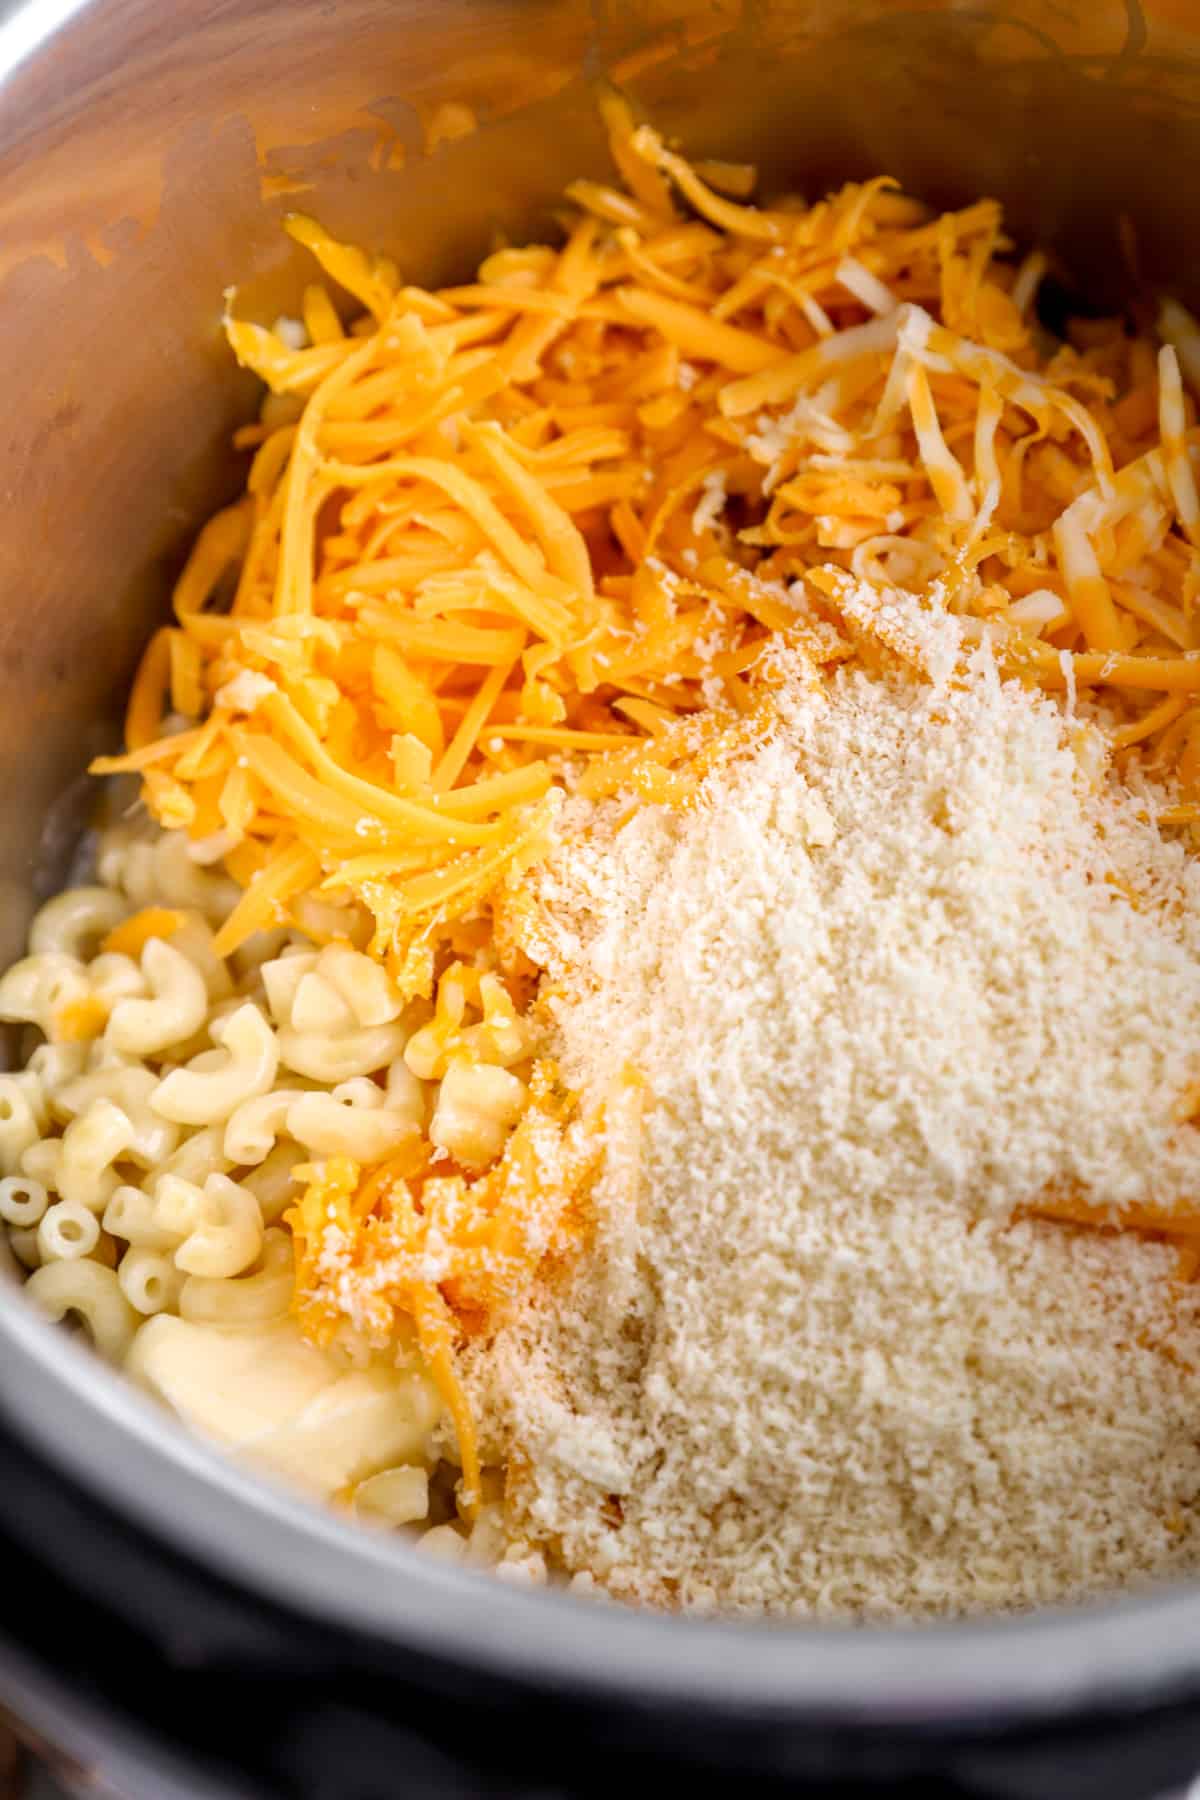 Everything in the Instant Pot to make Instant Pot Mac and Cheese